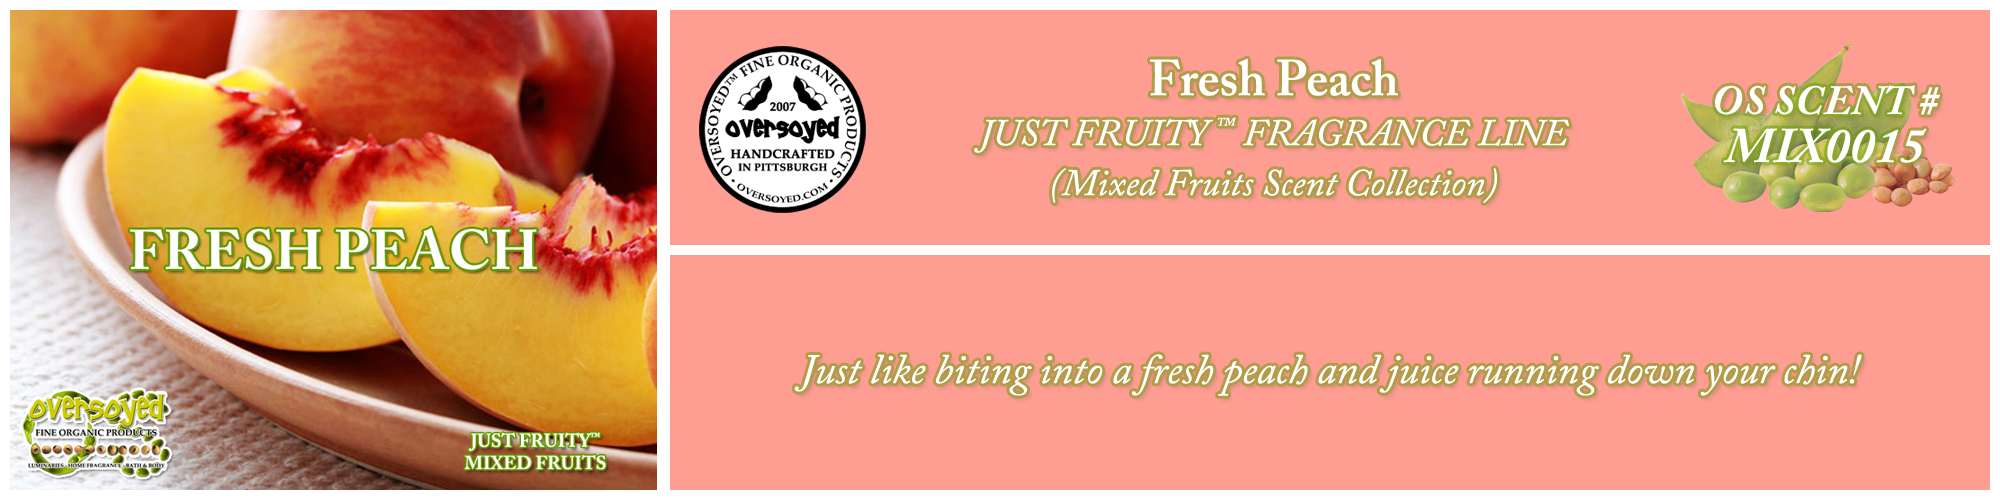 Fresh Peach Handcrafted Products Collection